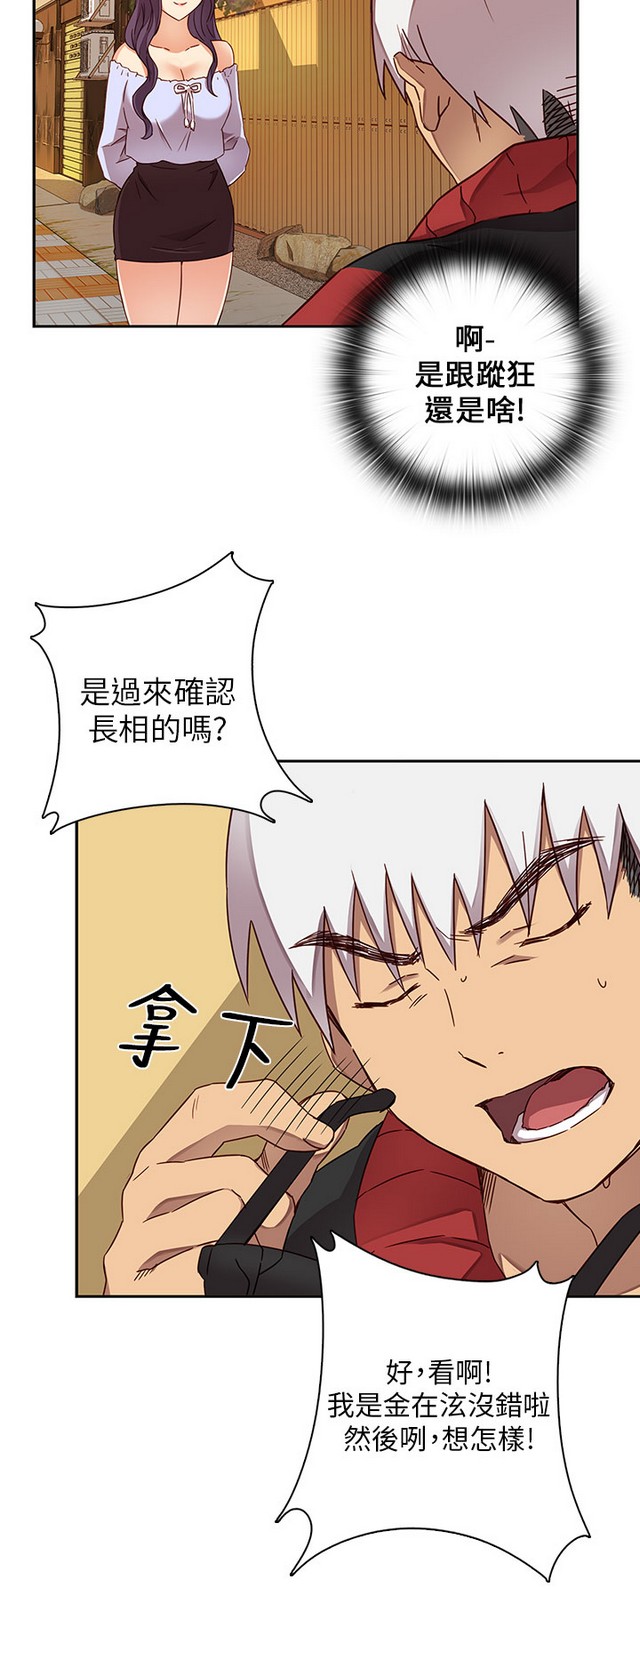 H校园 第一季 ch.10-18 [chinese] page 35 full